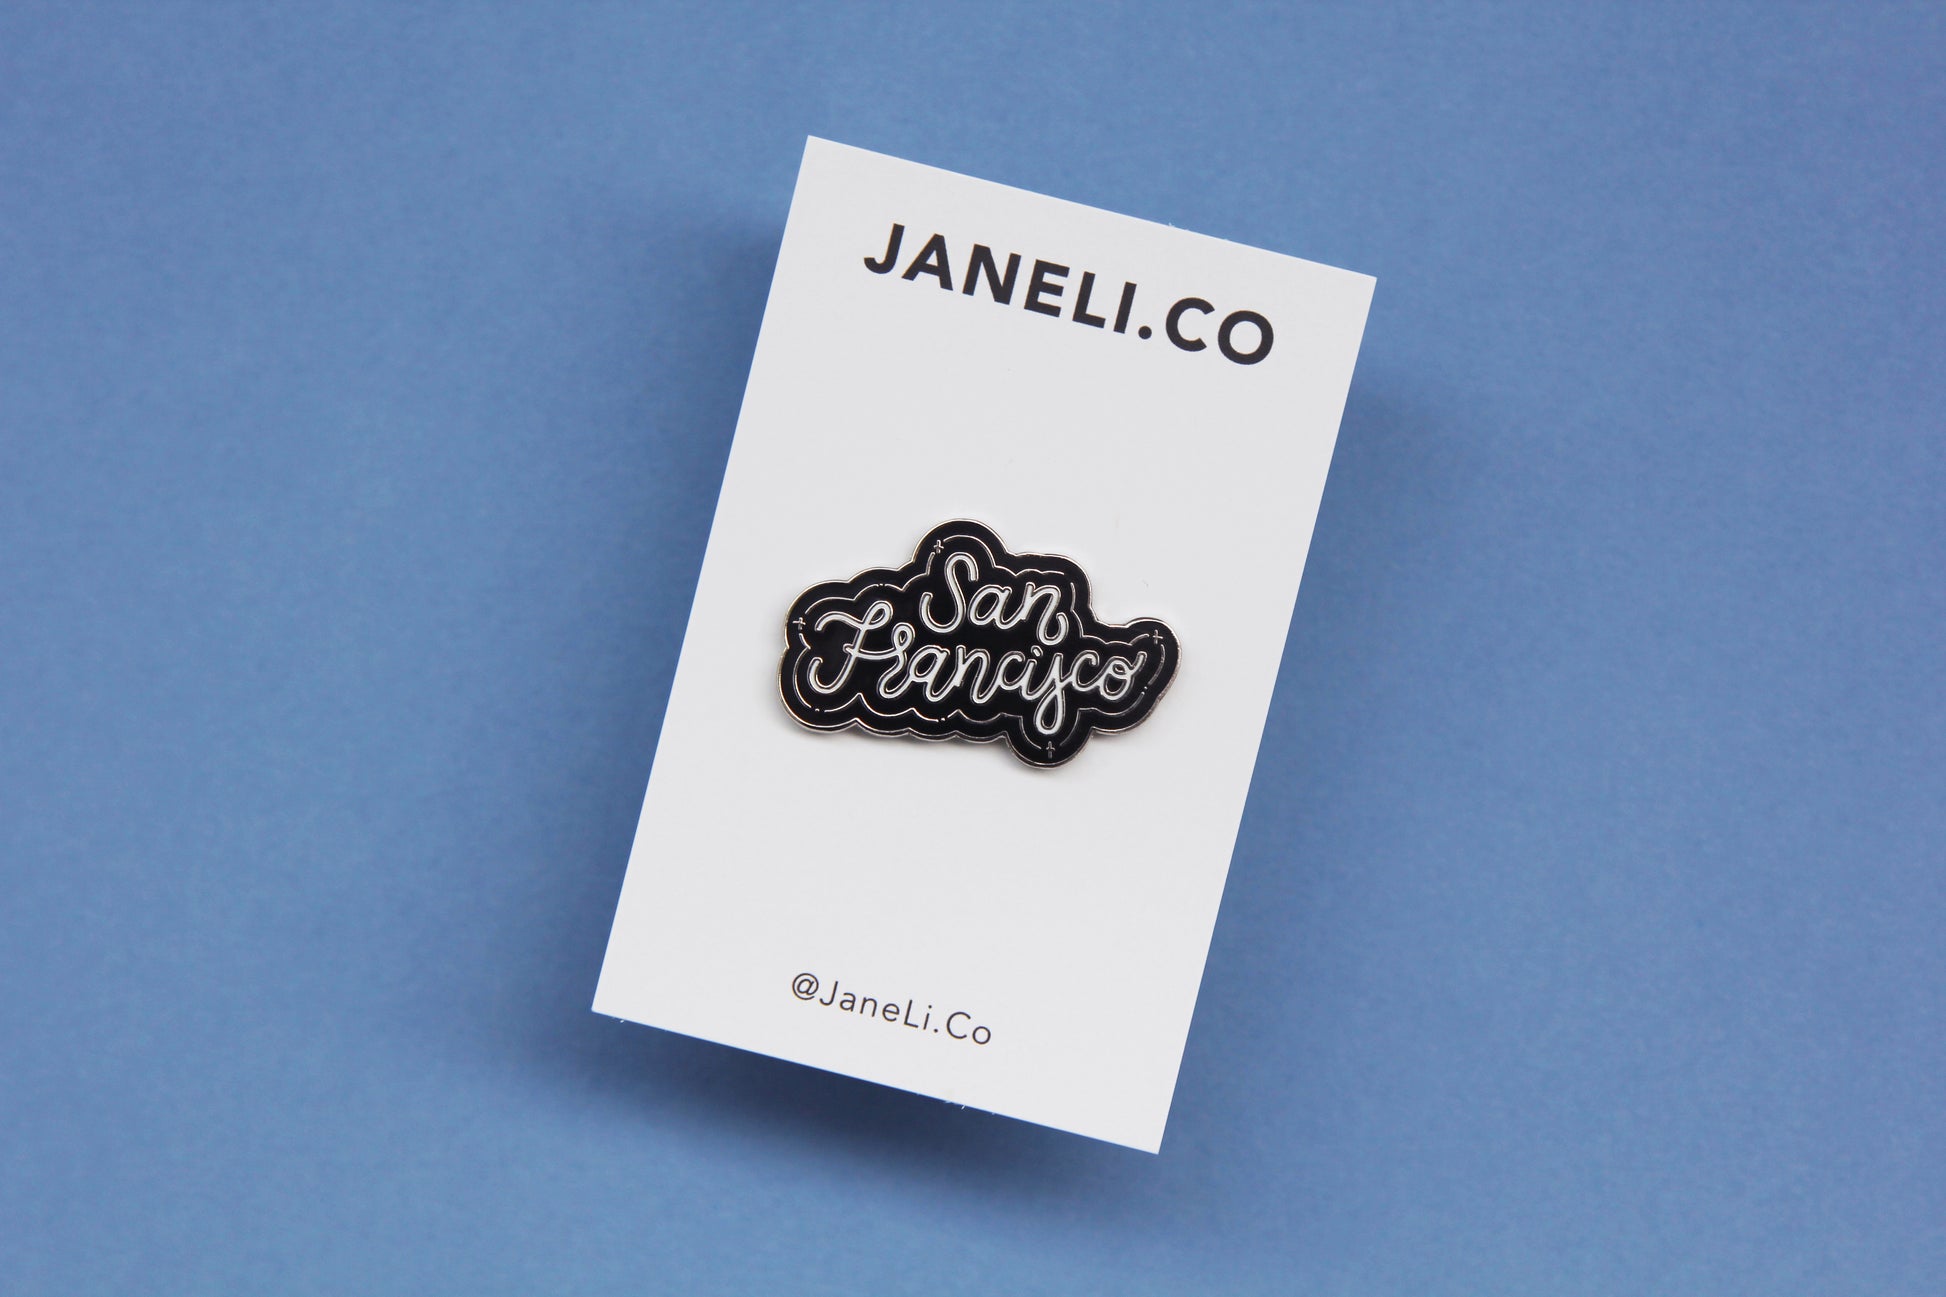 A black, white, and silver enamel pin that says "San Francisco" on a white JaneLi.Co backing card over a blue background.